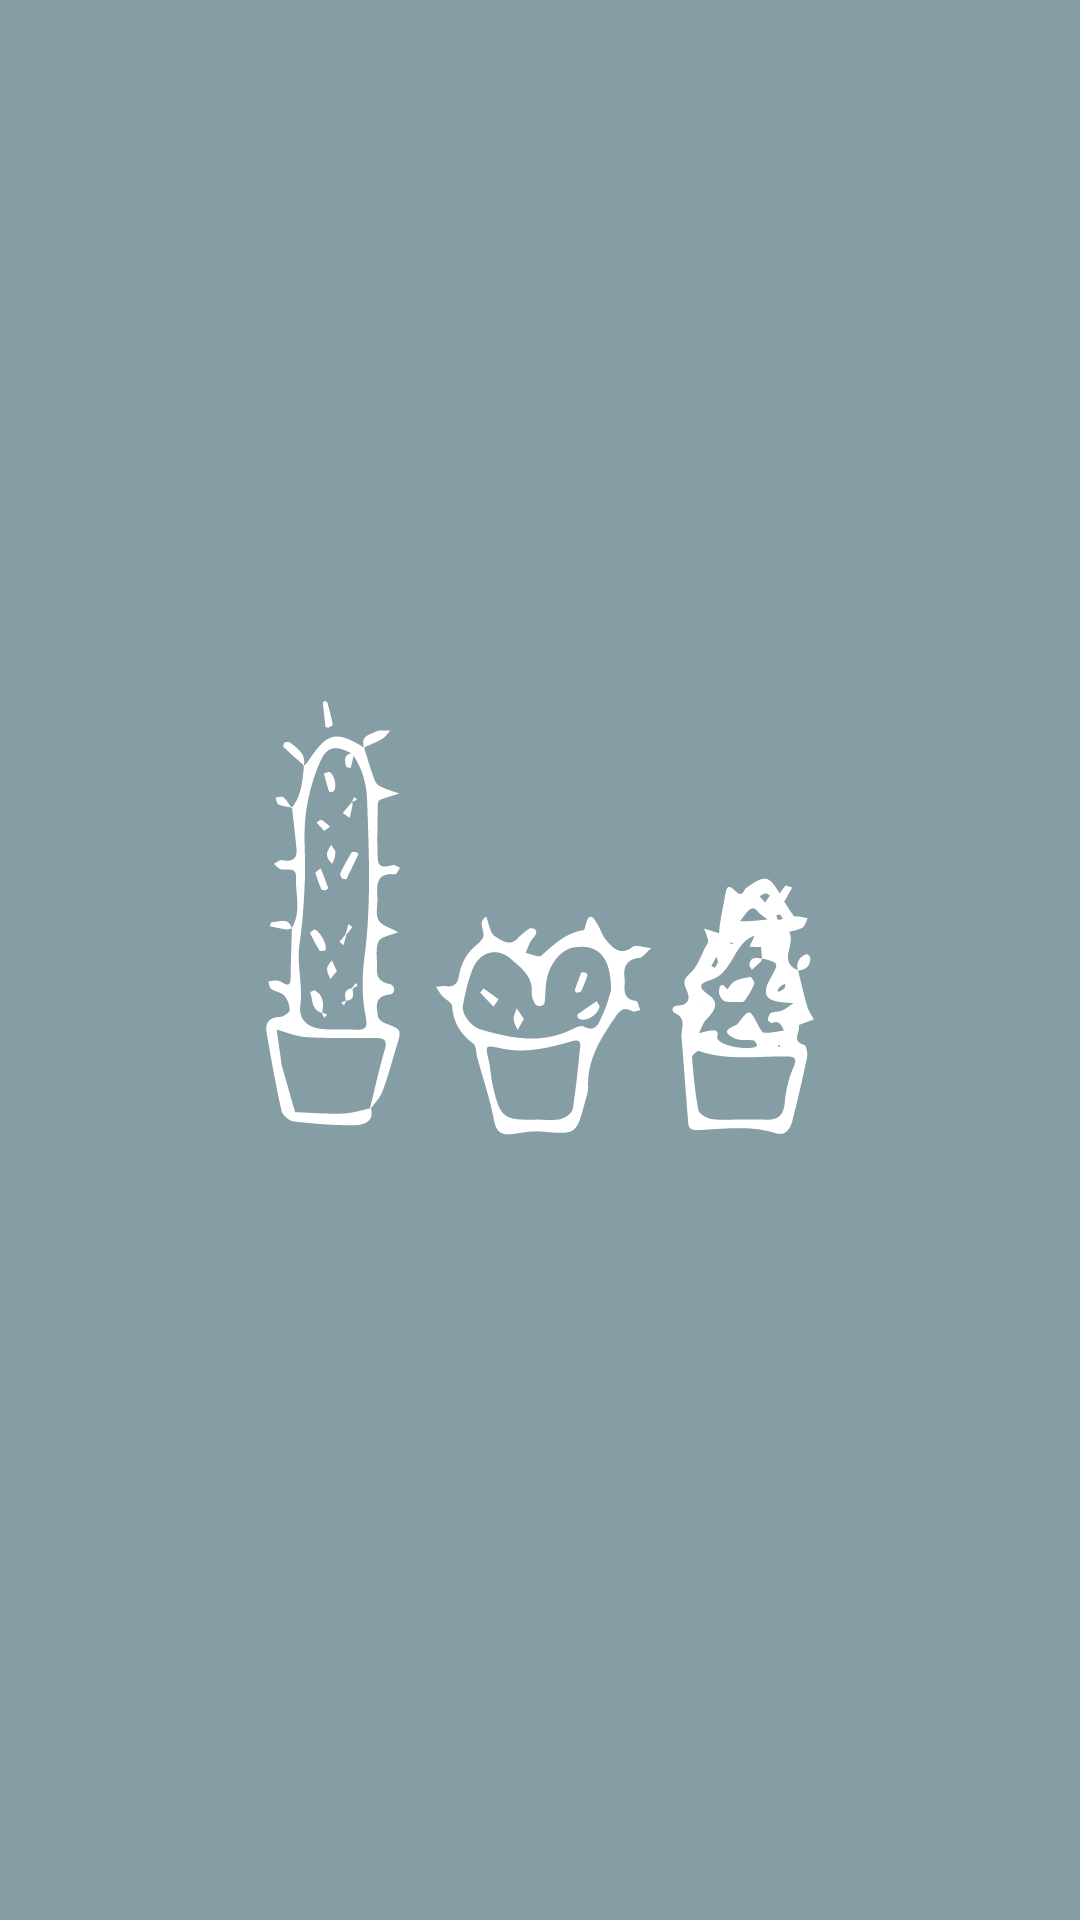 Three cacti in pots on a blue background - Simple, plants